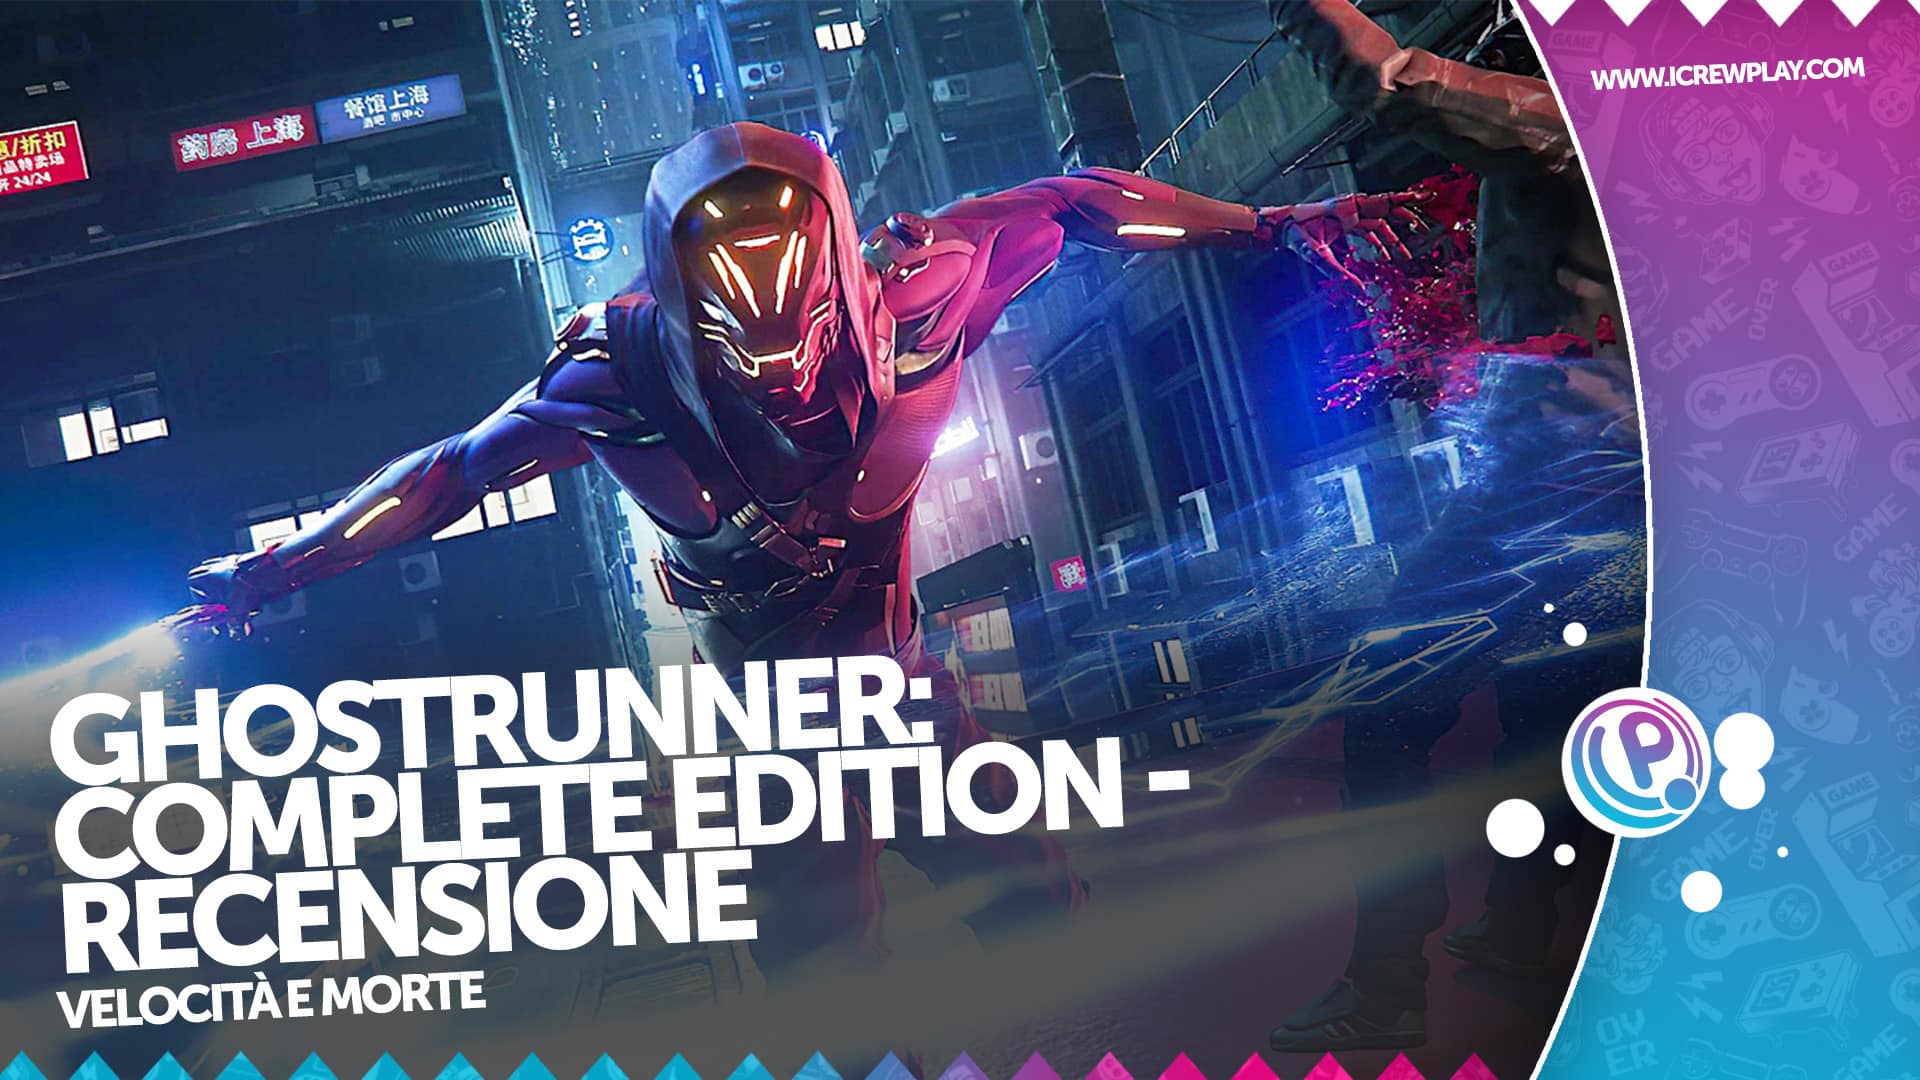 Ghostrunner: Complete Edition - Recensione per PlayStation 5 2